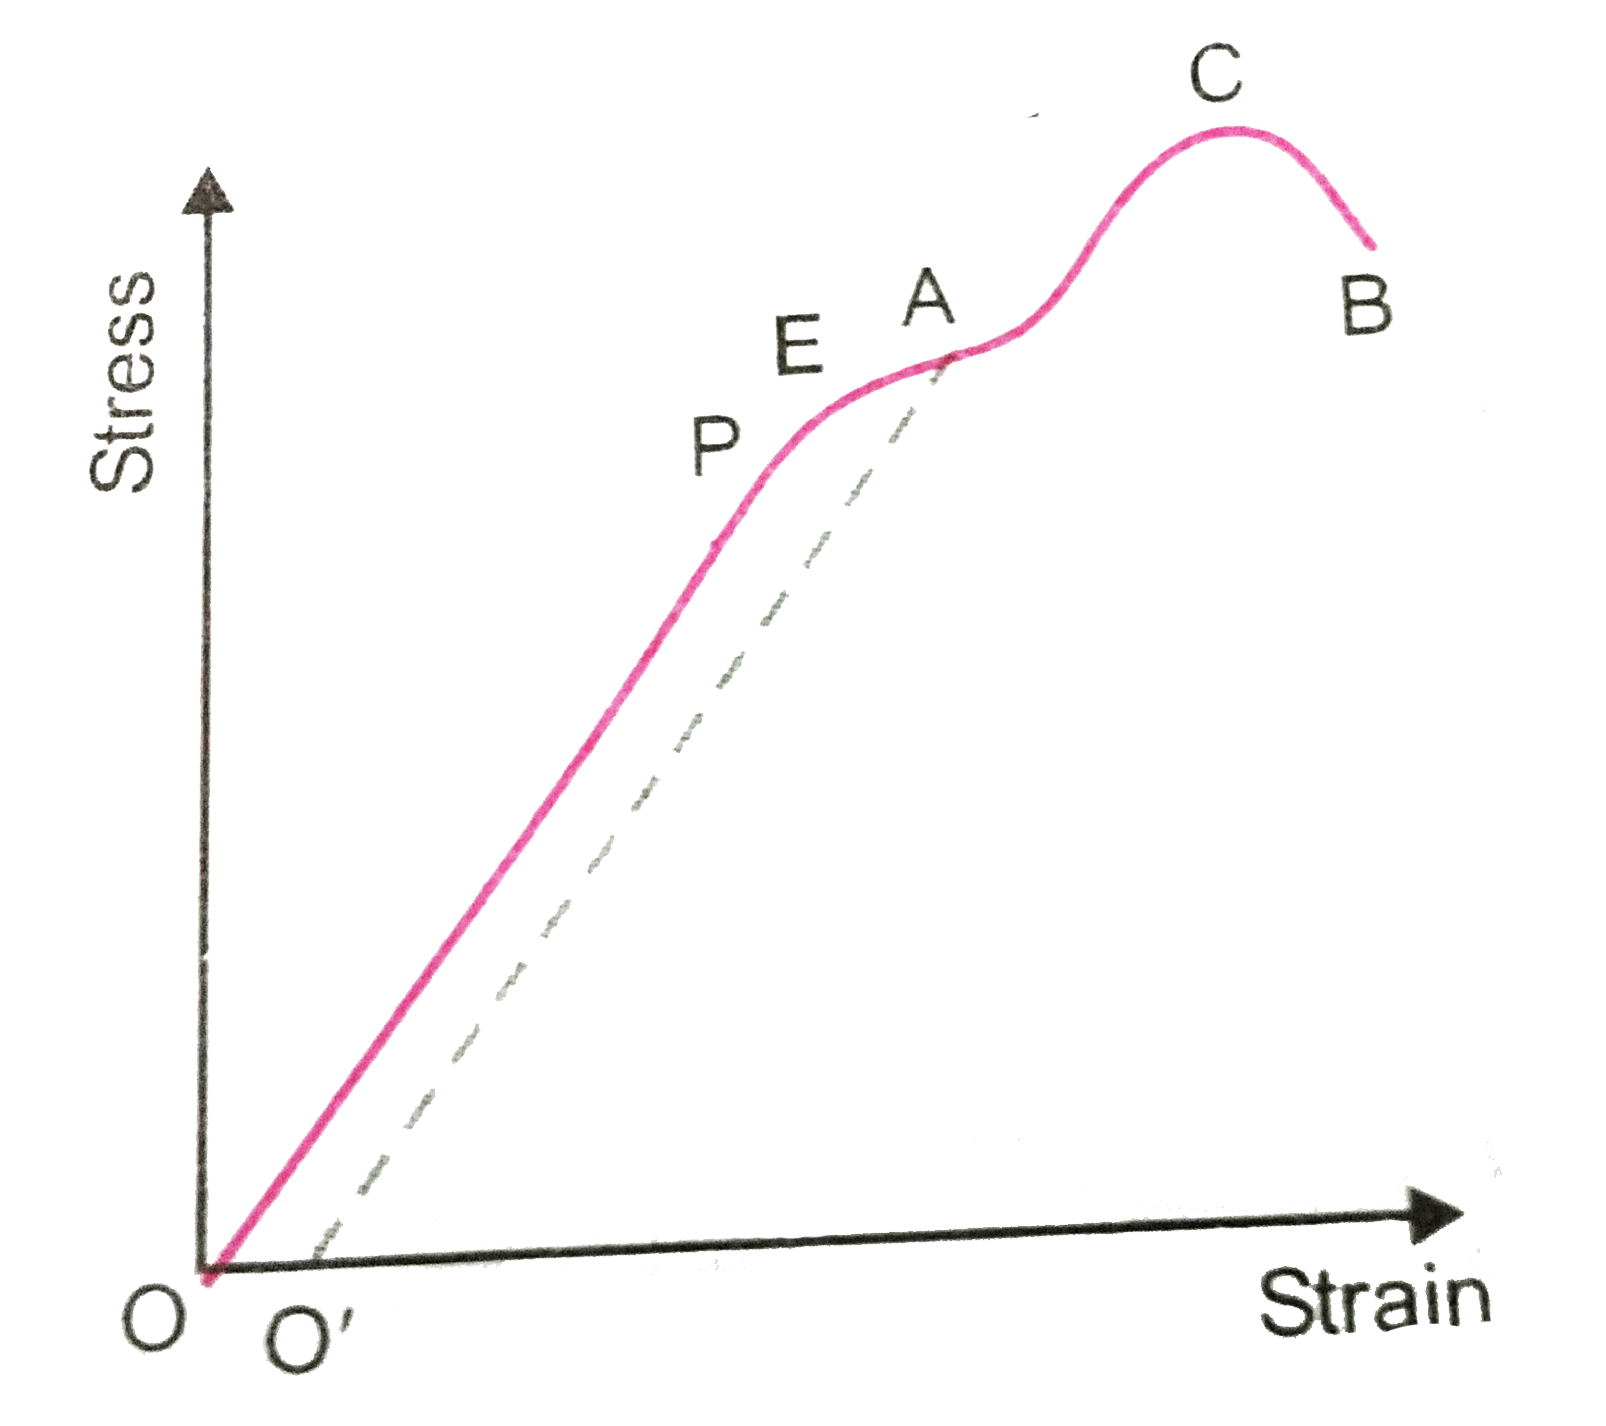 The stress strain graph for a metal wire is shown in the fig. Upto the point E, the wire returns to its original state O along the curve EPO, when  it is gradually unloaded. Point B corresponds to the fracture of the wire. (a) Upto what point on the curve is Hooke's law obeyed? (this point some times called proportional limits).       (b) Which point on the curve corresponding to elastic limet or yield point of the wire?   (c ) Indicate teh elastice and plastic regions of the stree-strain graph.   (d) Describe what happens when the wire is loaded upto a stress corresponding to the point A on the graph and then unloaded gradulally. In particular explain the dotted curve.   (e) Wht is peculiar about the protion of the stree- strain graph from C to B? Upto what stress can the wire be subjected with out causing fracture?